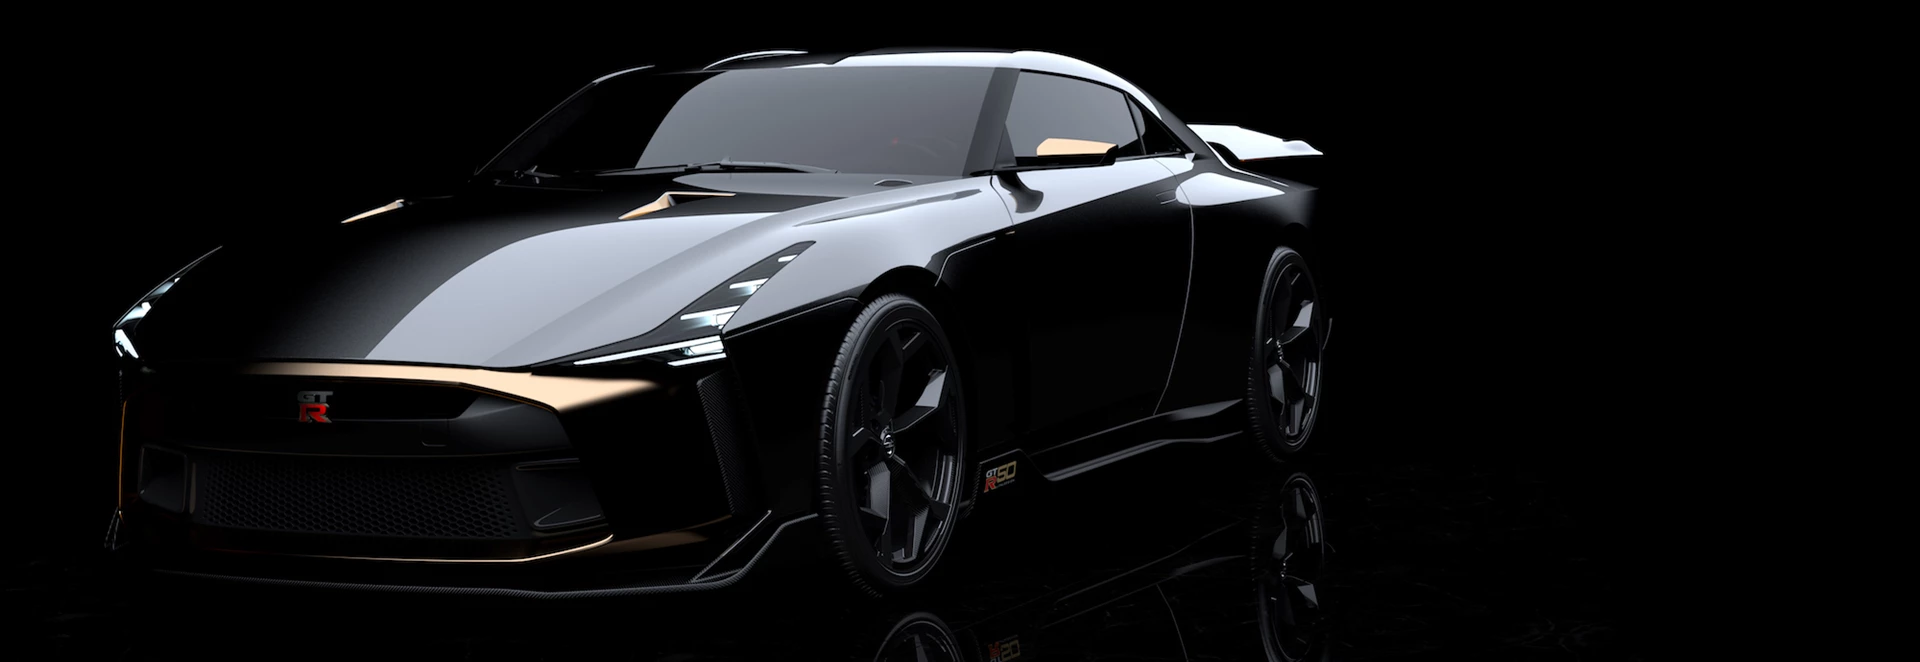 Nissan and Italdesign join forces for GT-R prototype